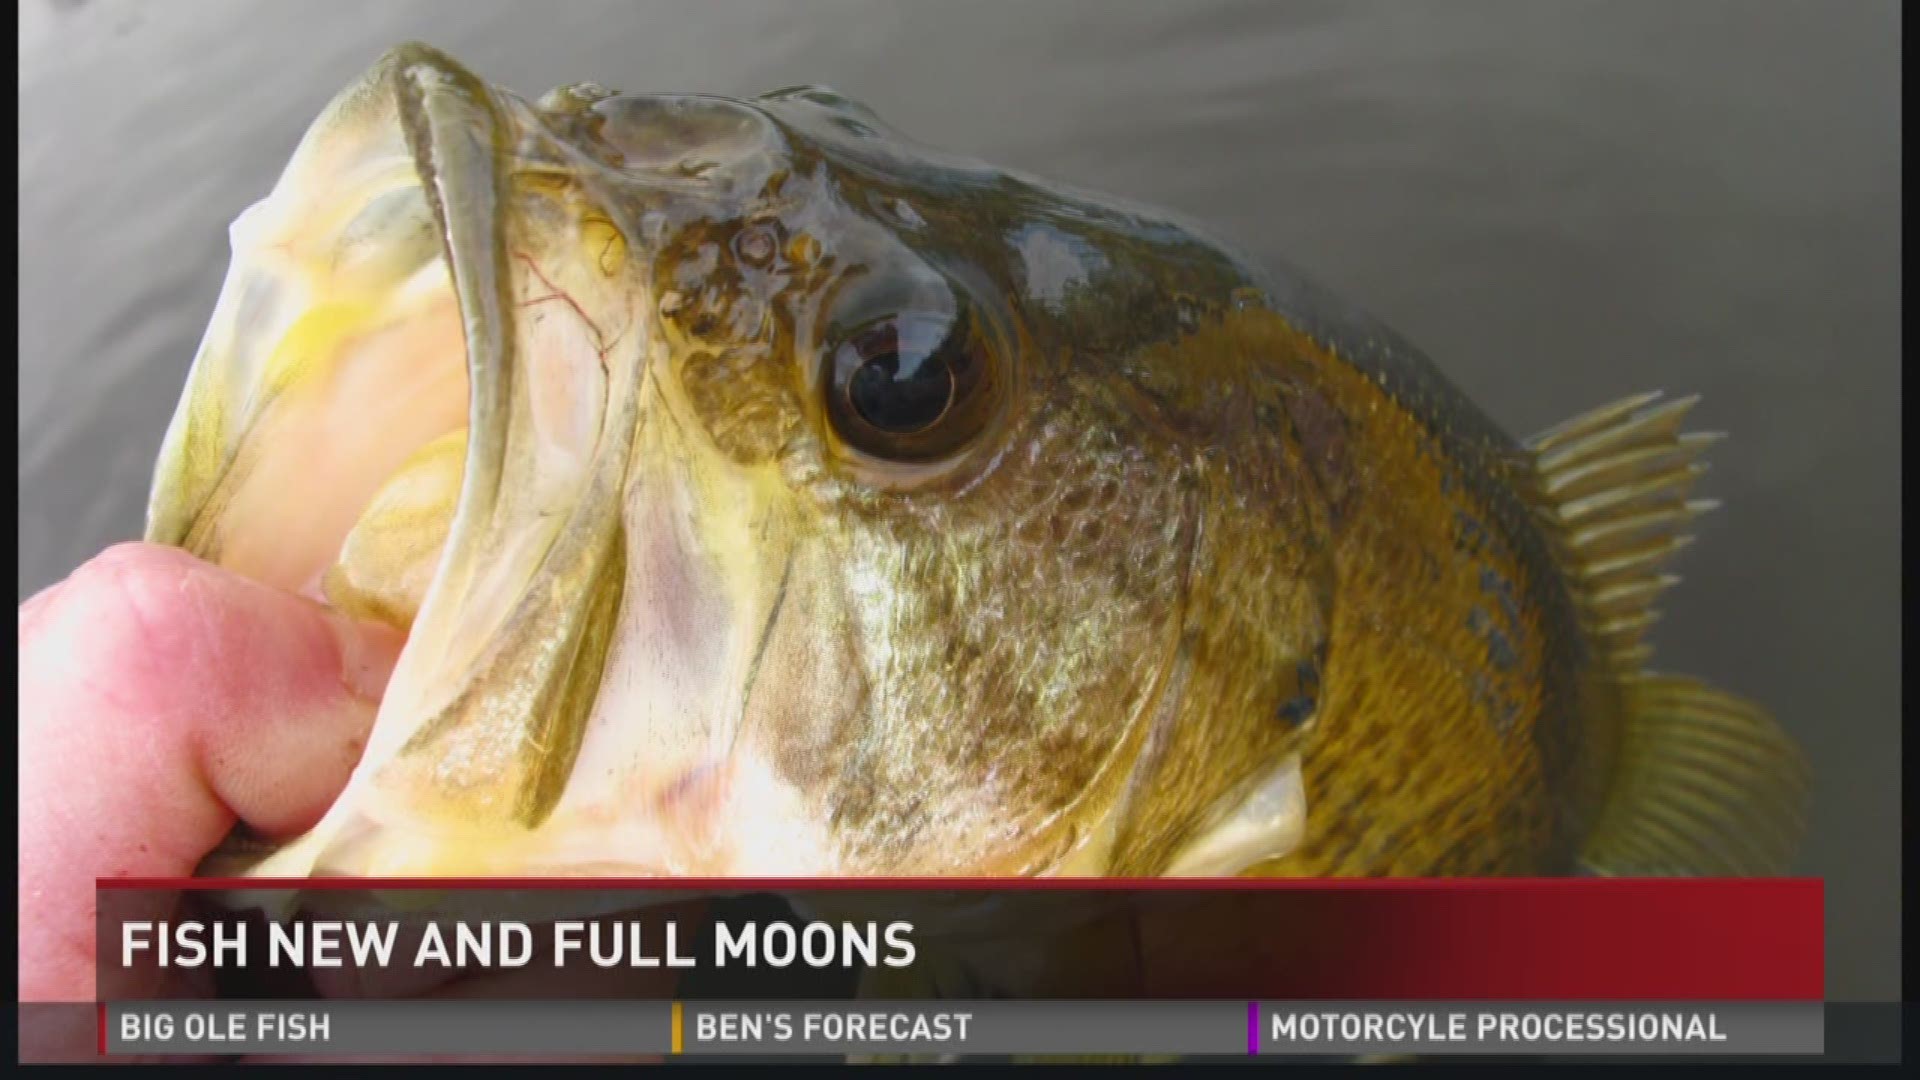 Fishing Tip: Fish new and full moons